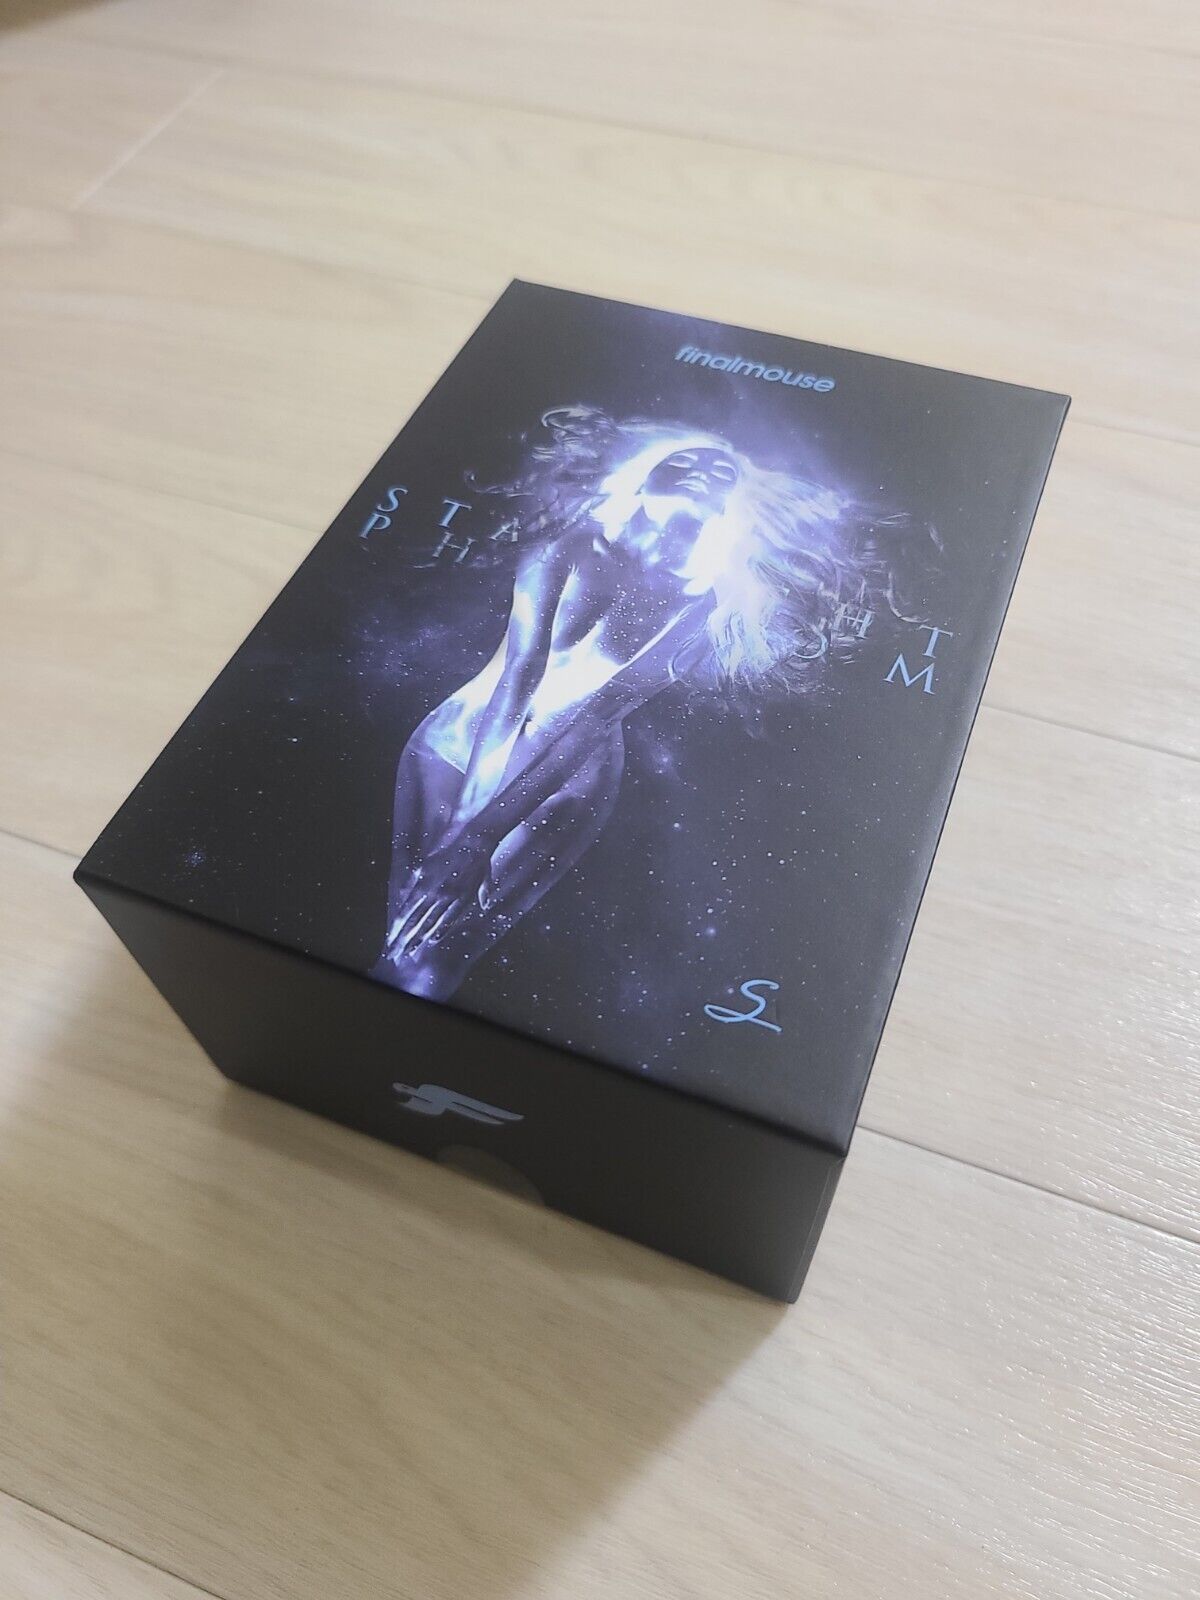 Finalmouse Starlight 12 Phantom ( S ) Gaming mous unopened size:S